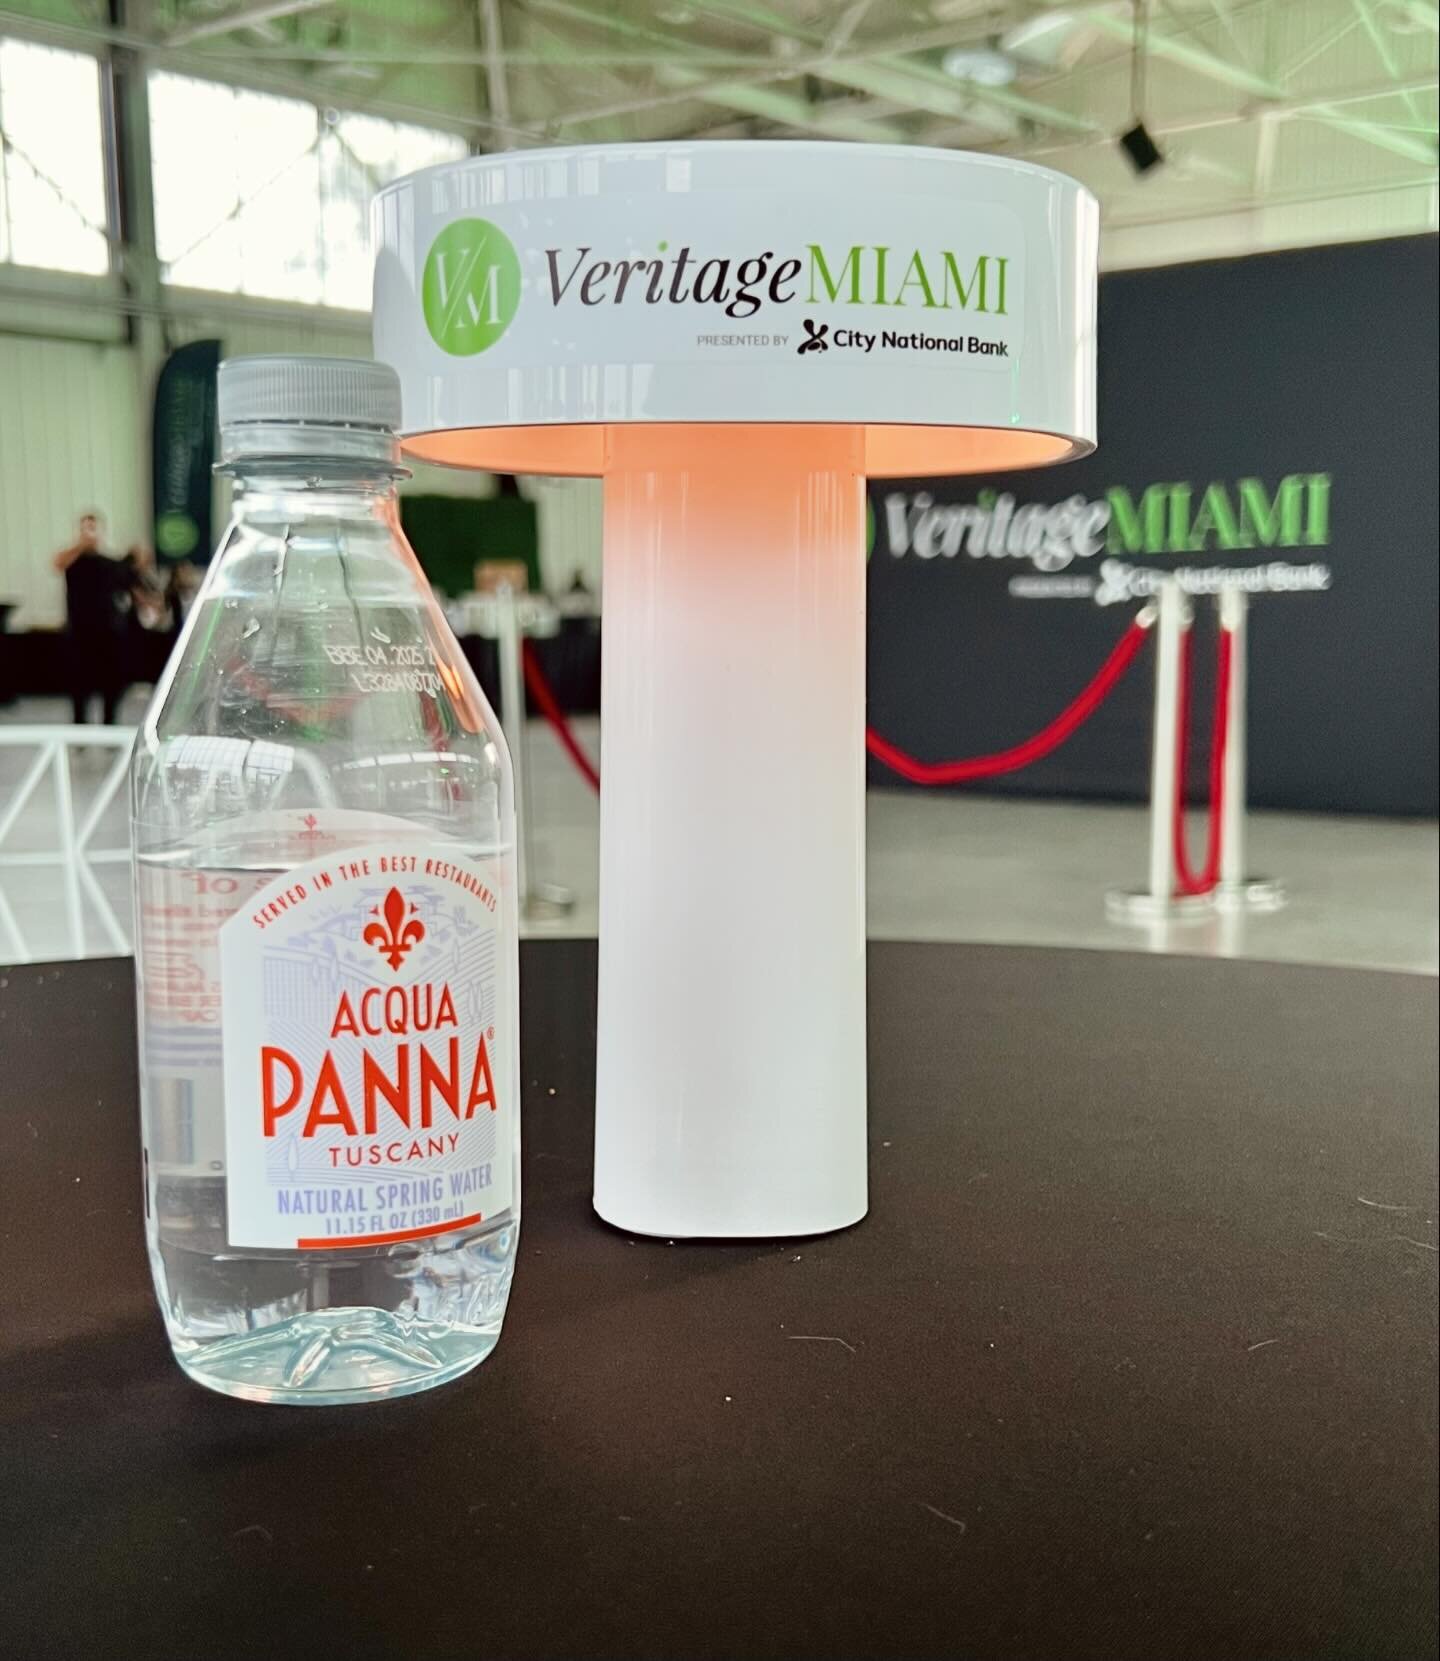 There is a lot of wine ahead at the @veritagemiami Wine &amp; Food Experience at The Hangar at Regatta Harbor, so I&rsquo;m taking a moment to hydrate with my @acquapanna. Bring it on!!